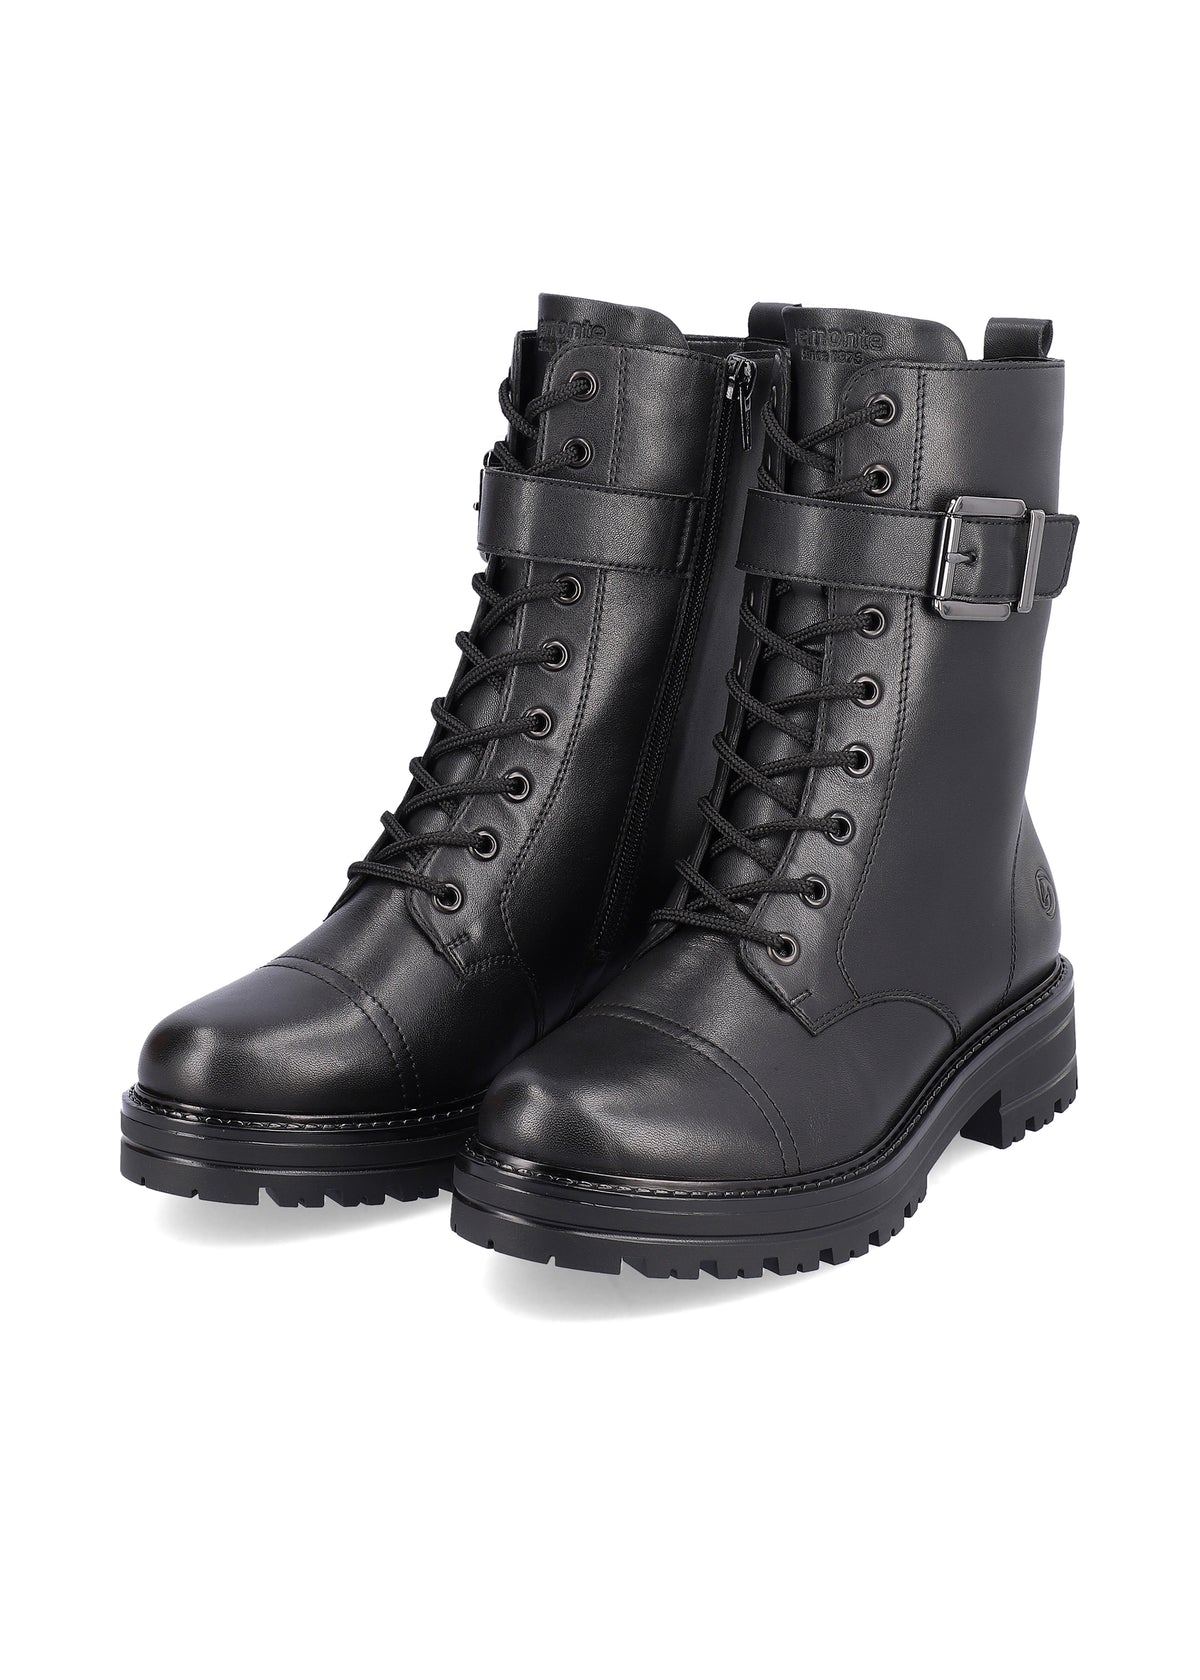 Winter ankle boots with a thick sole - black